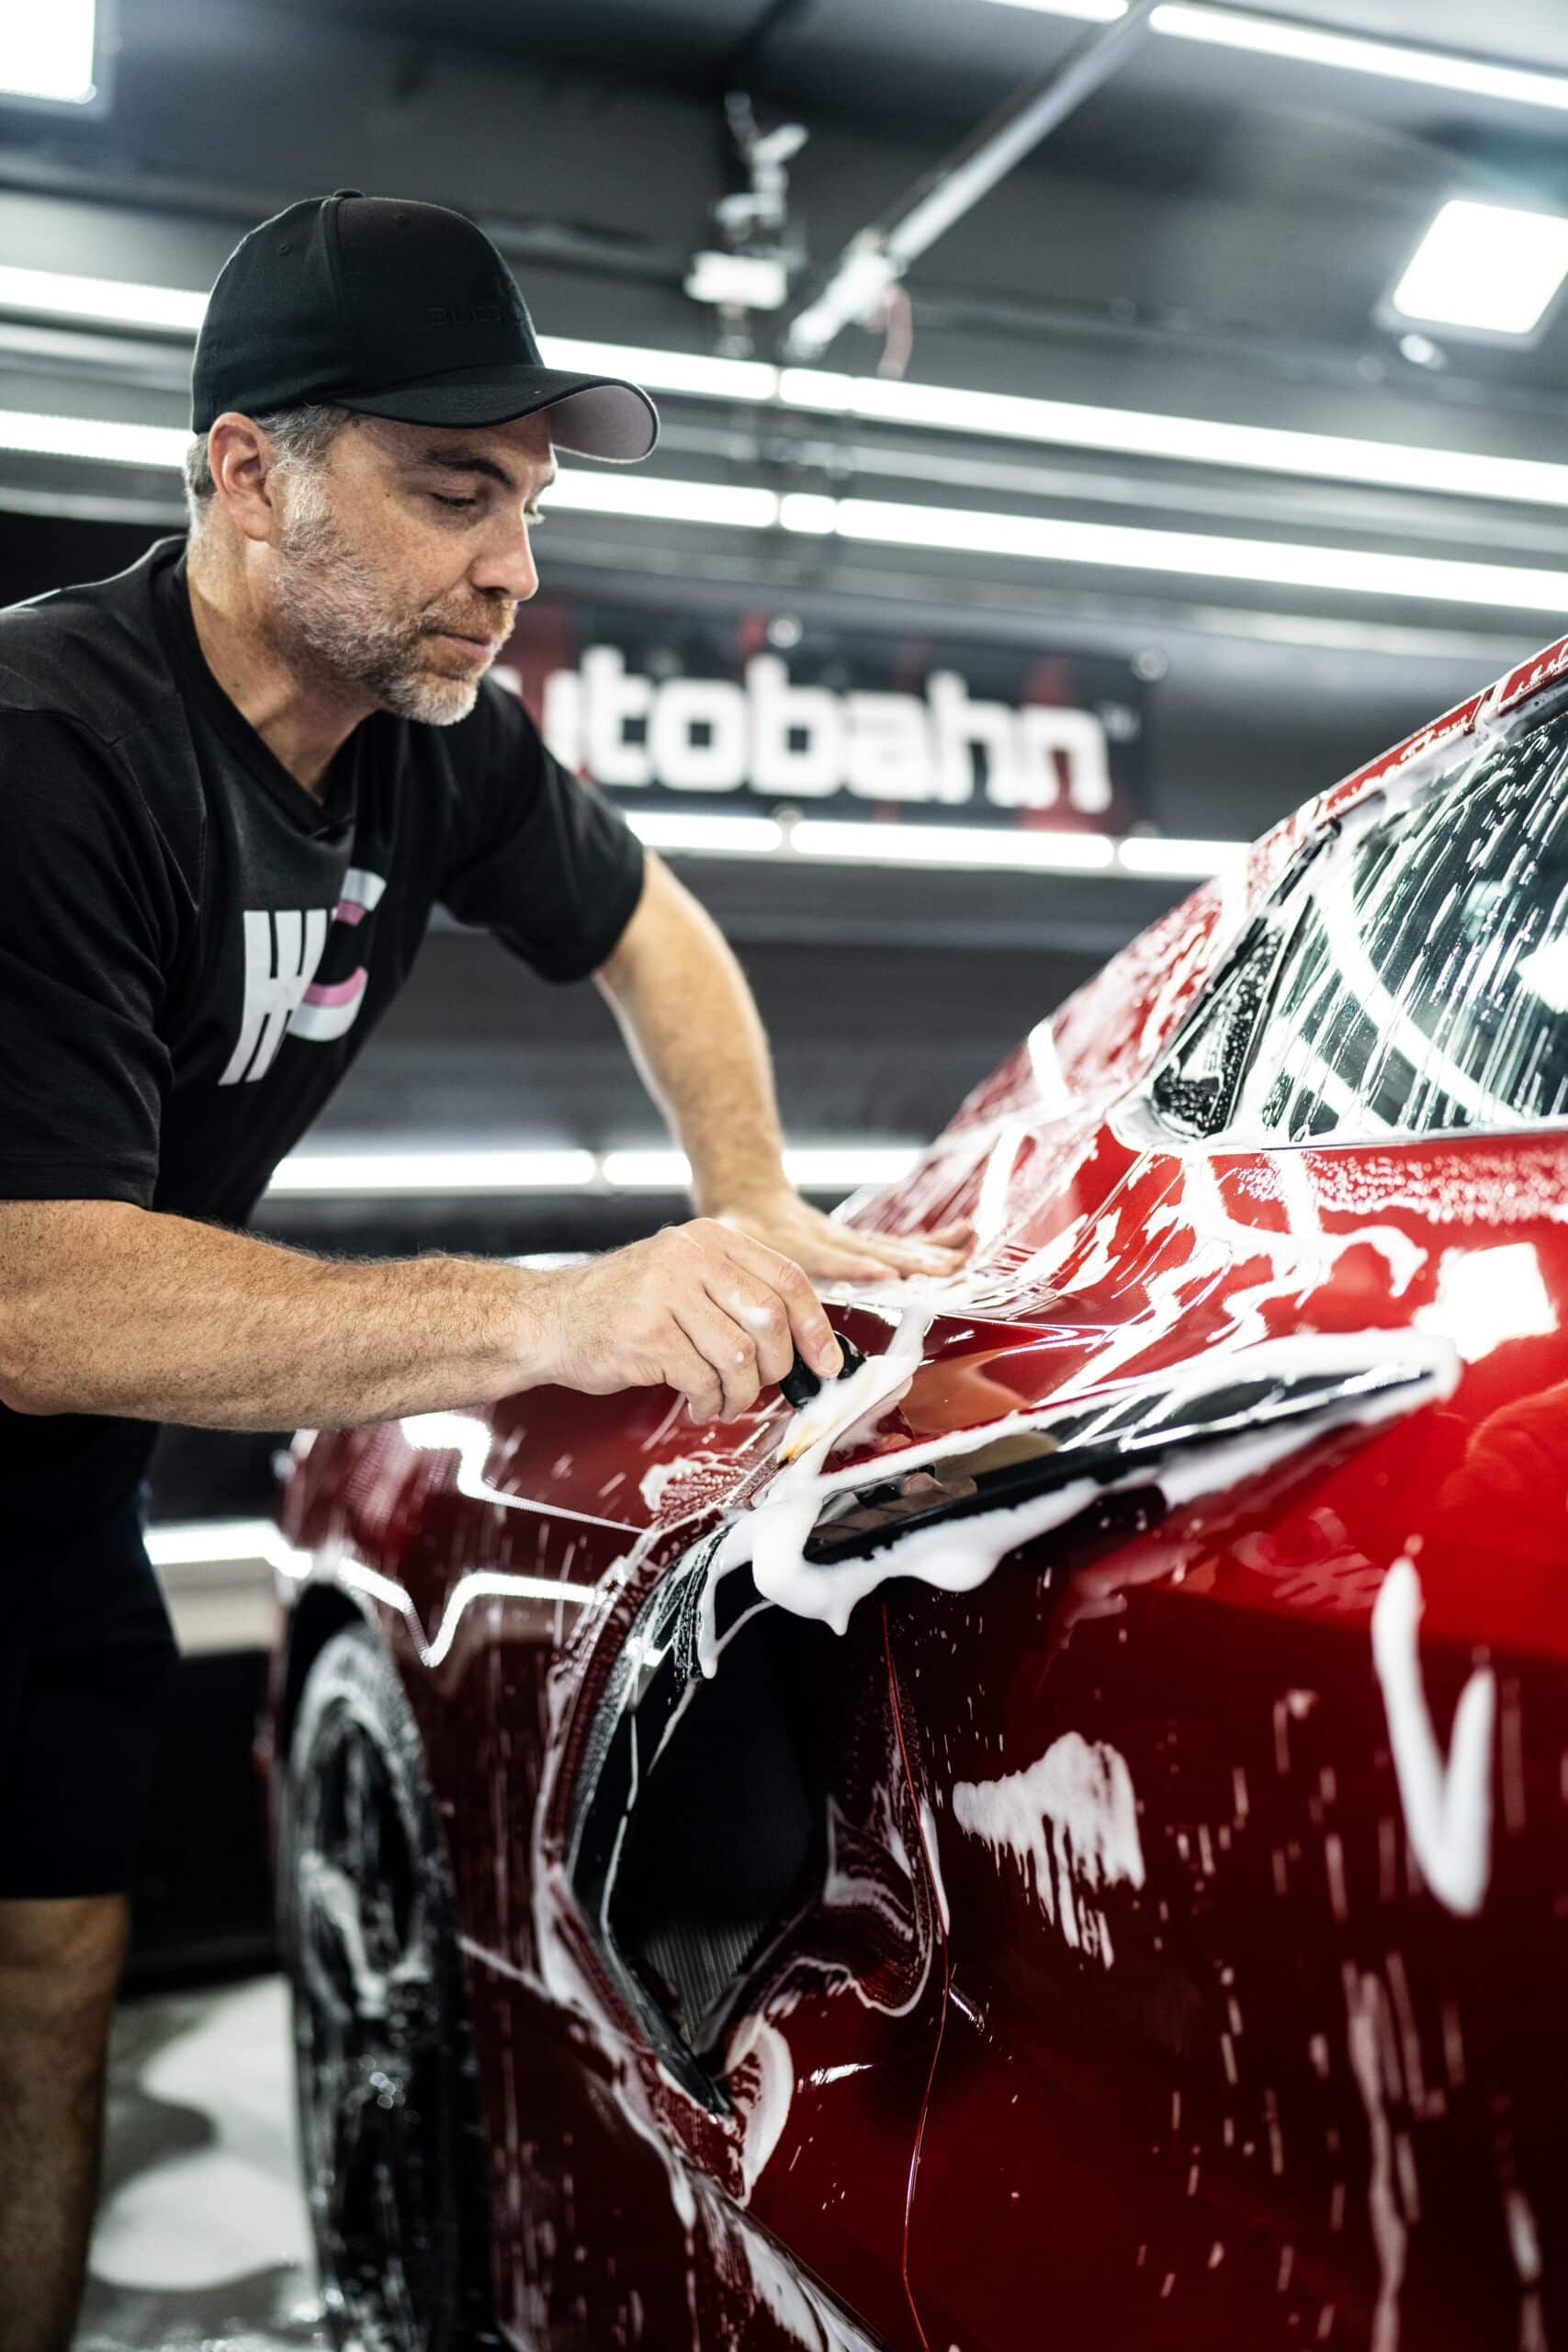 A man is washing a red car in a garage.